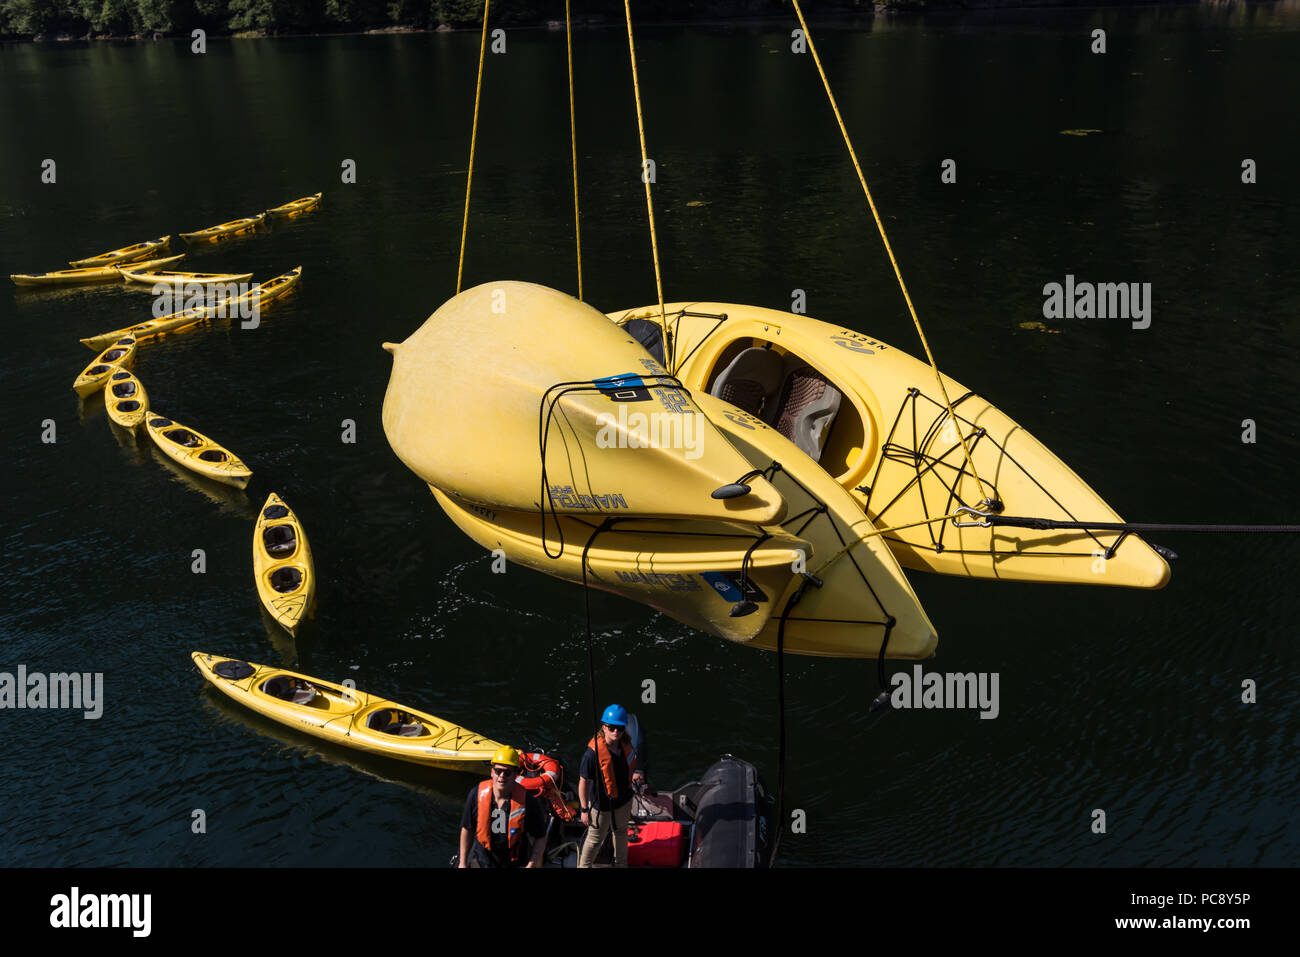 Two crew members of the National Geographic Sea Bird supervise the lowering of 4 yellow kayaks with other kayaks floating in the water behind them. Stock Photo